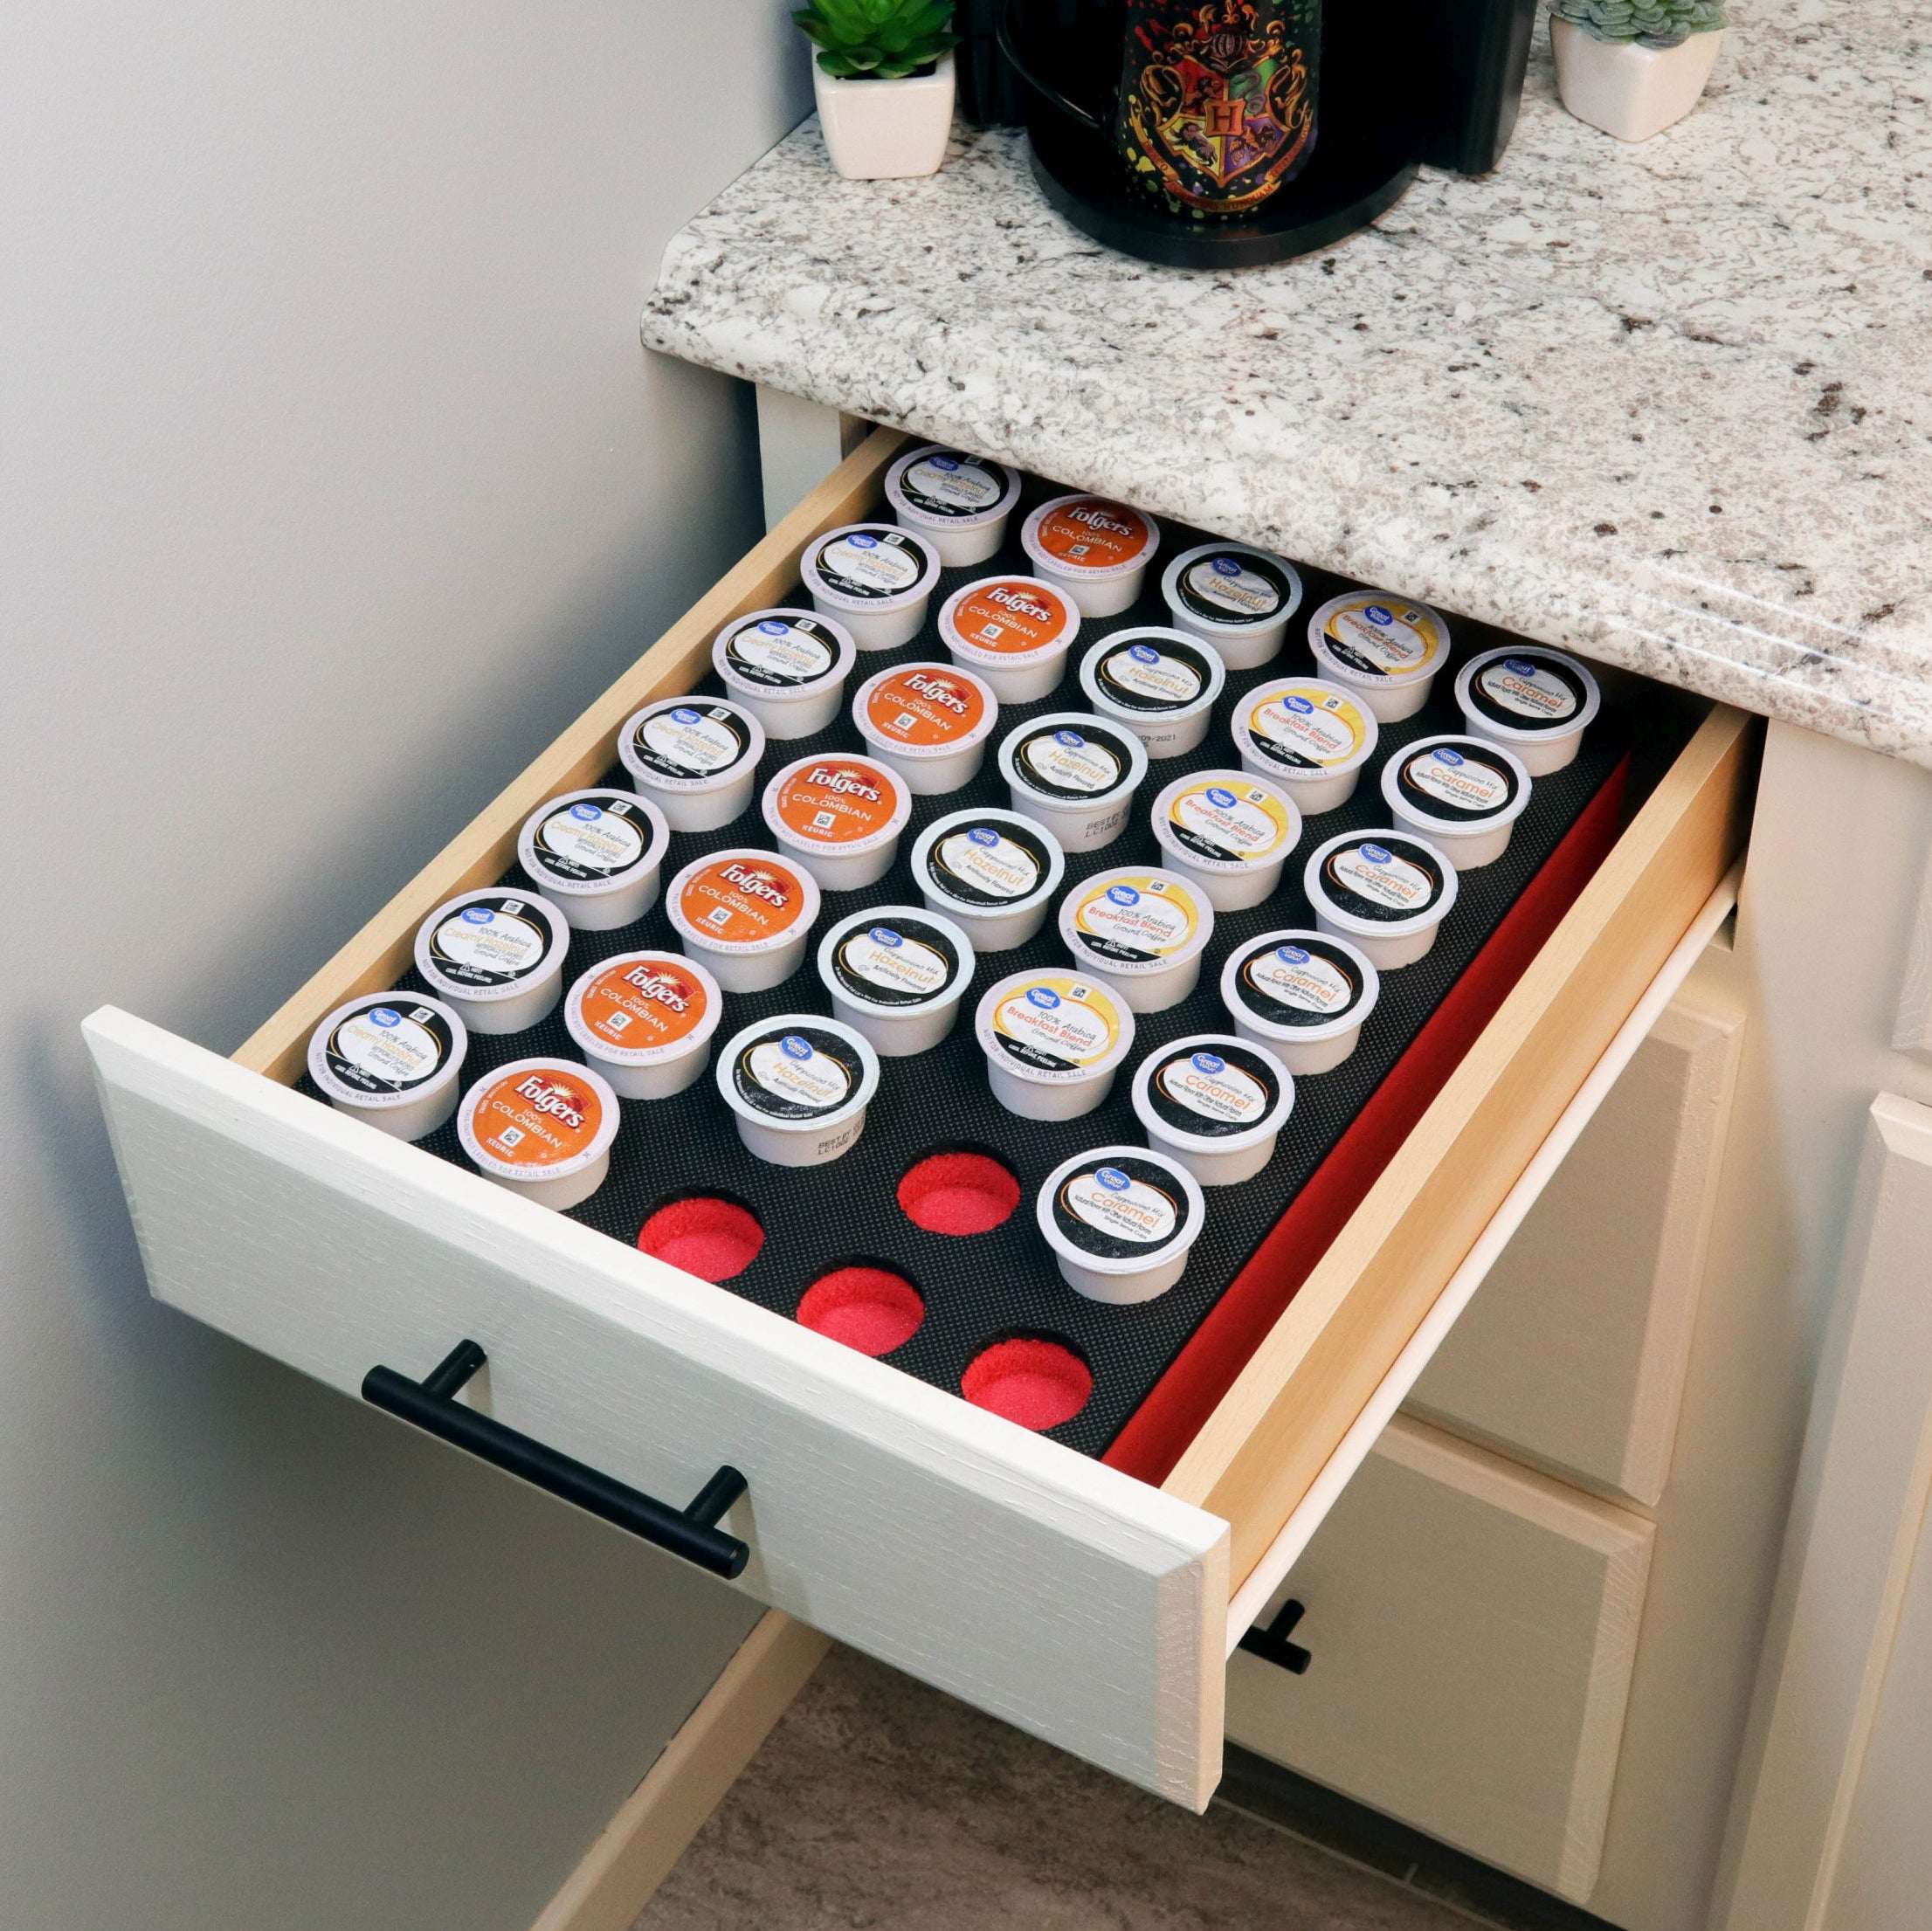 Coffee Red and Black Pod Storage Deluxe Organizer Tray Drawer Insert Washable 11.9 X 15.9 Inches Holds 35 Compatible with Keurig K-Cup